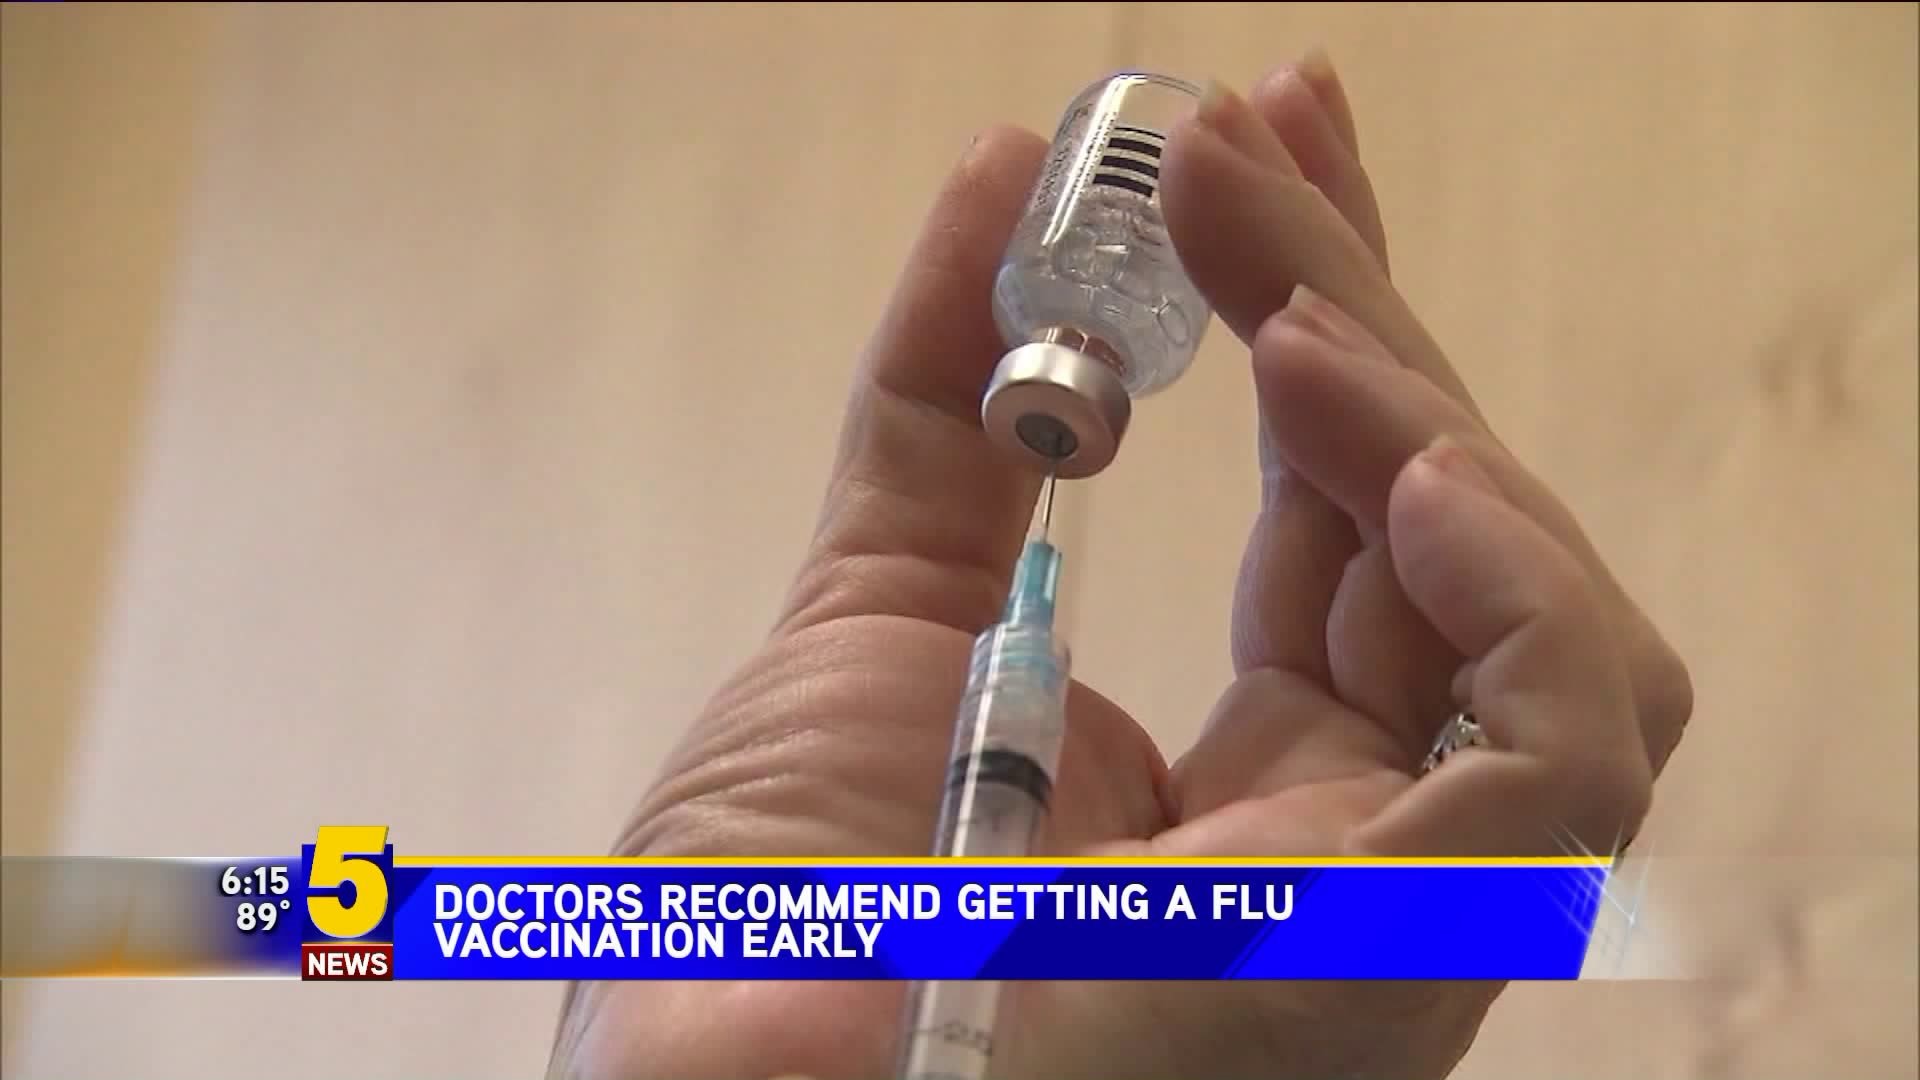 Doctors Recommend Getting Flu Vaccination Early